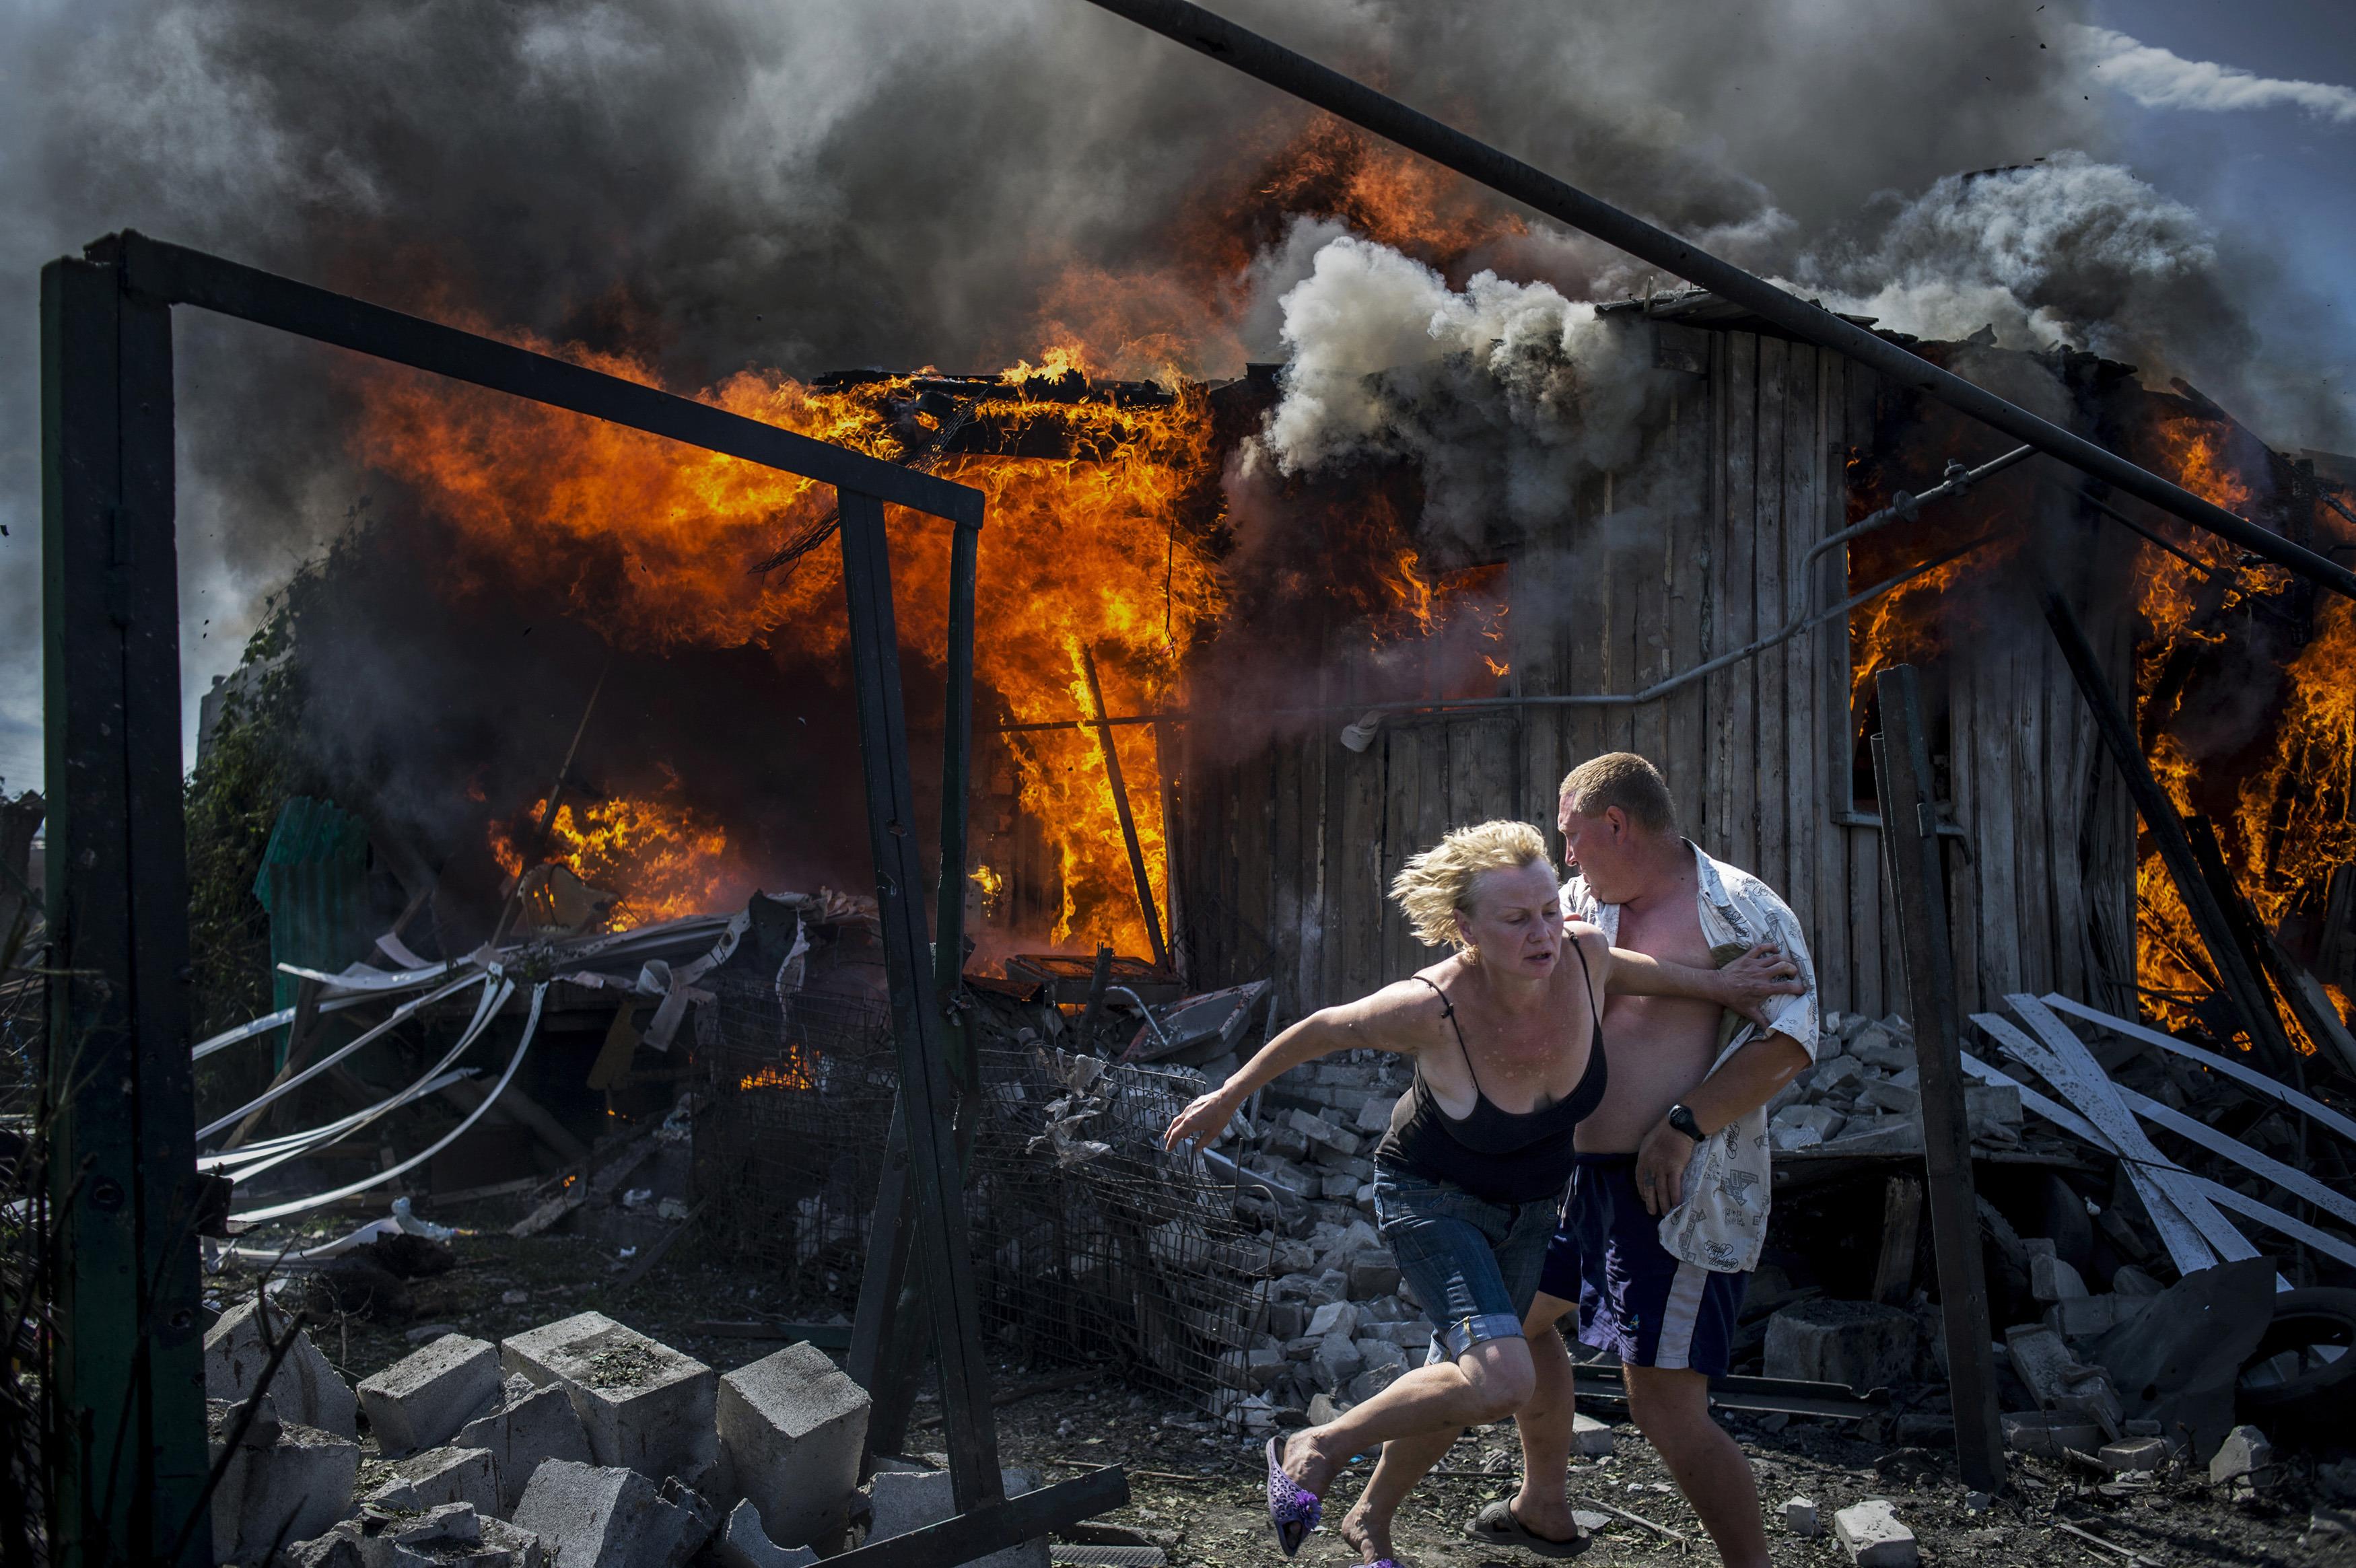 In 2014 the conflict between rebels and the government army in Ukraine led the country to the full-scale hostilities. The local residents of the strategically located city of Luhansk were left without water and electricity for three months over the summer, while constant gunfire could be heard above their heads. According to the Federal Migration Service, more than 800 thousand Ukrainian citizens had to be relocated as a result of the conflict. Foto: Valery Melnikov / ROSSIYA SEGODNYA, Russia, Shortlist, Current Affairs, Professional Competition, 2015 Sony World Photography Awards